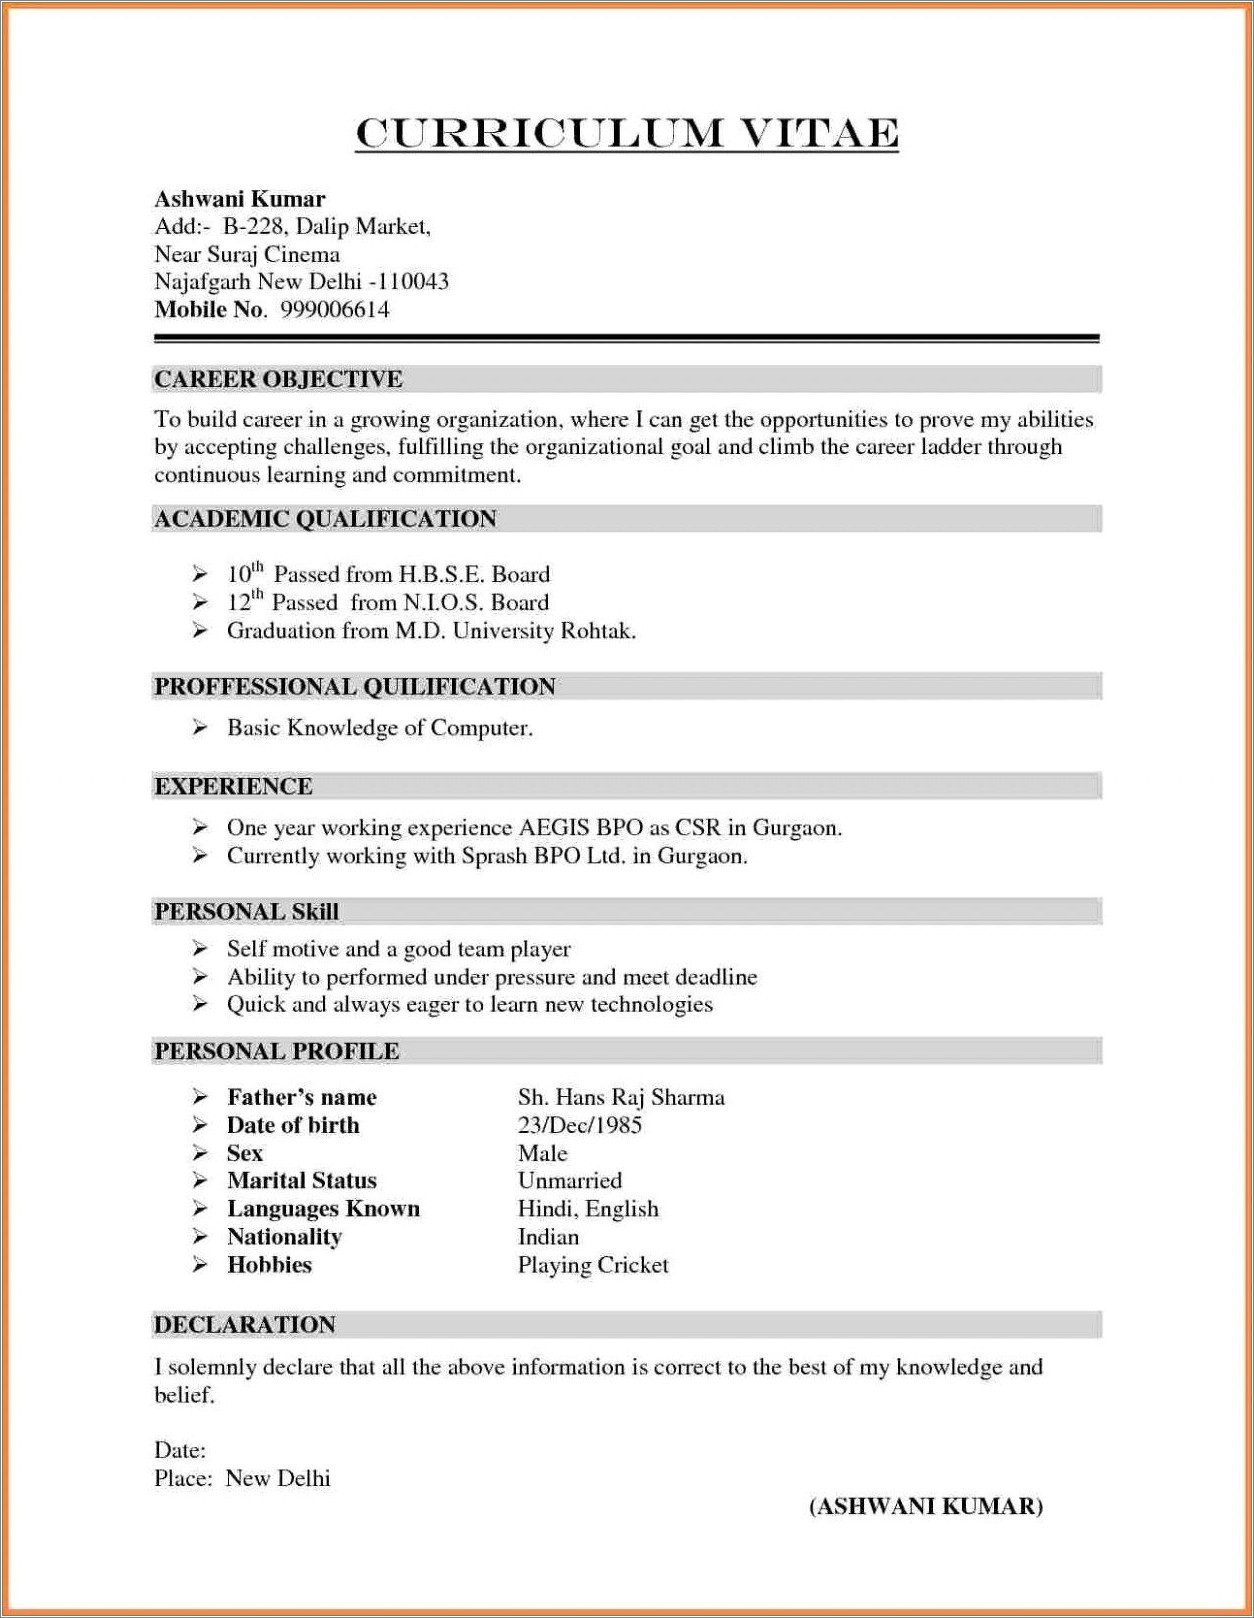 Does A Resume Need A Career Objective